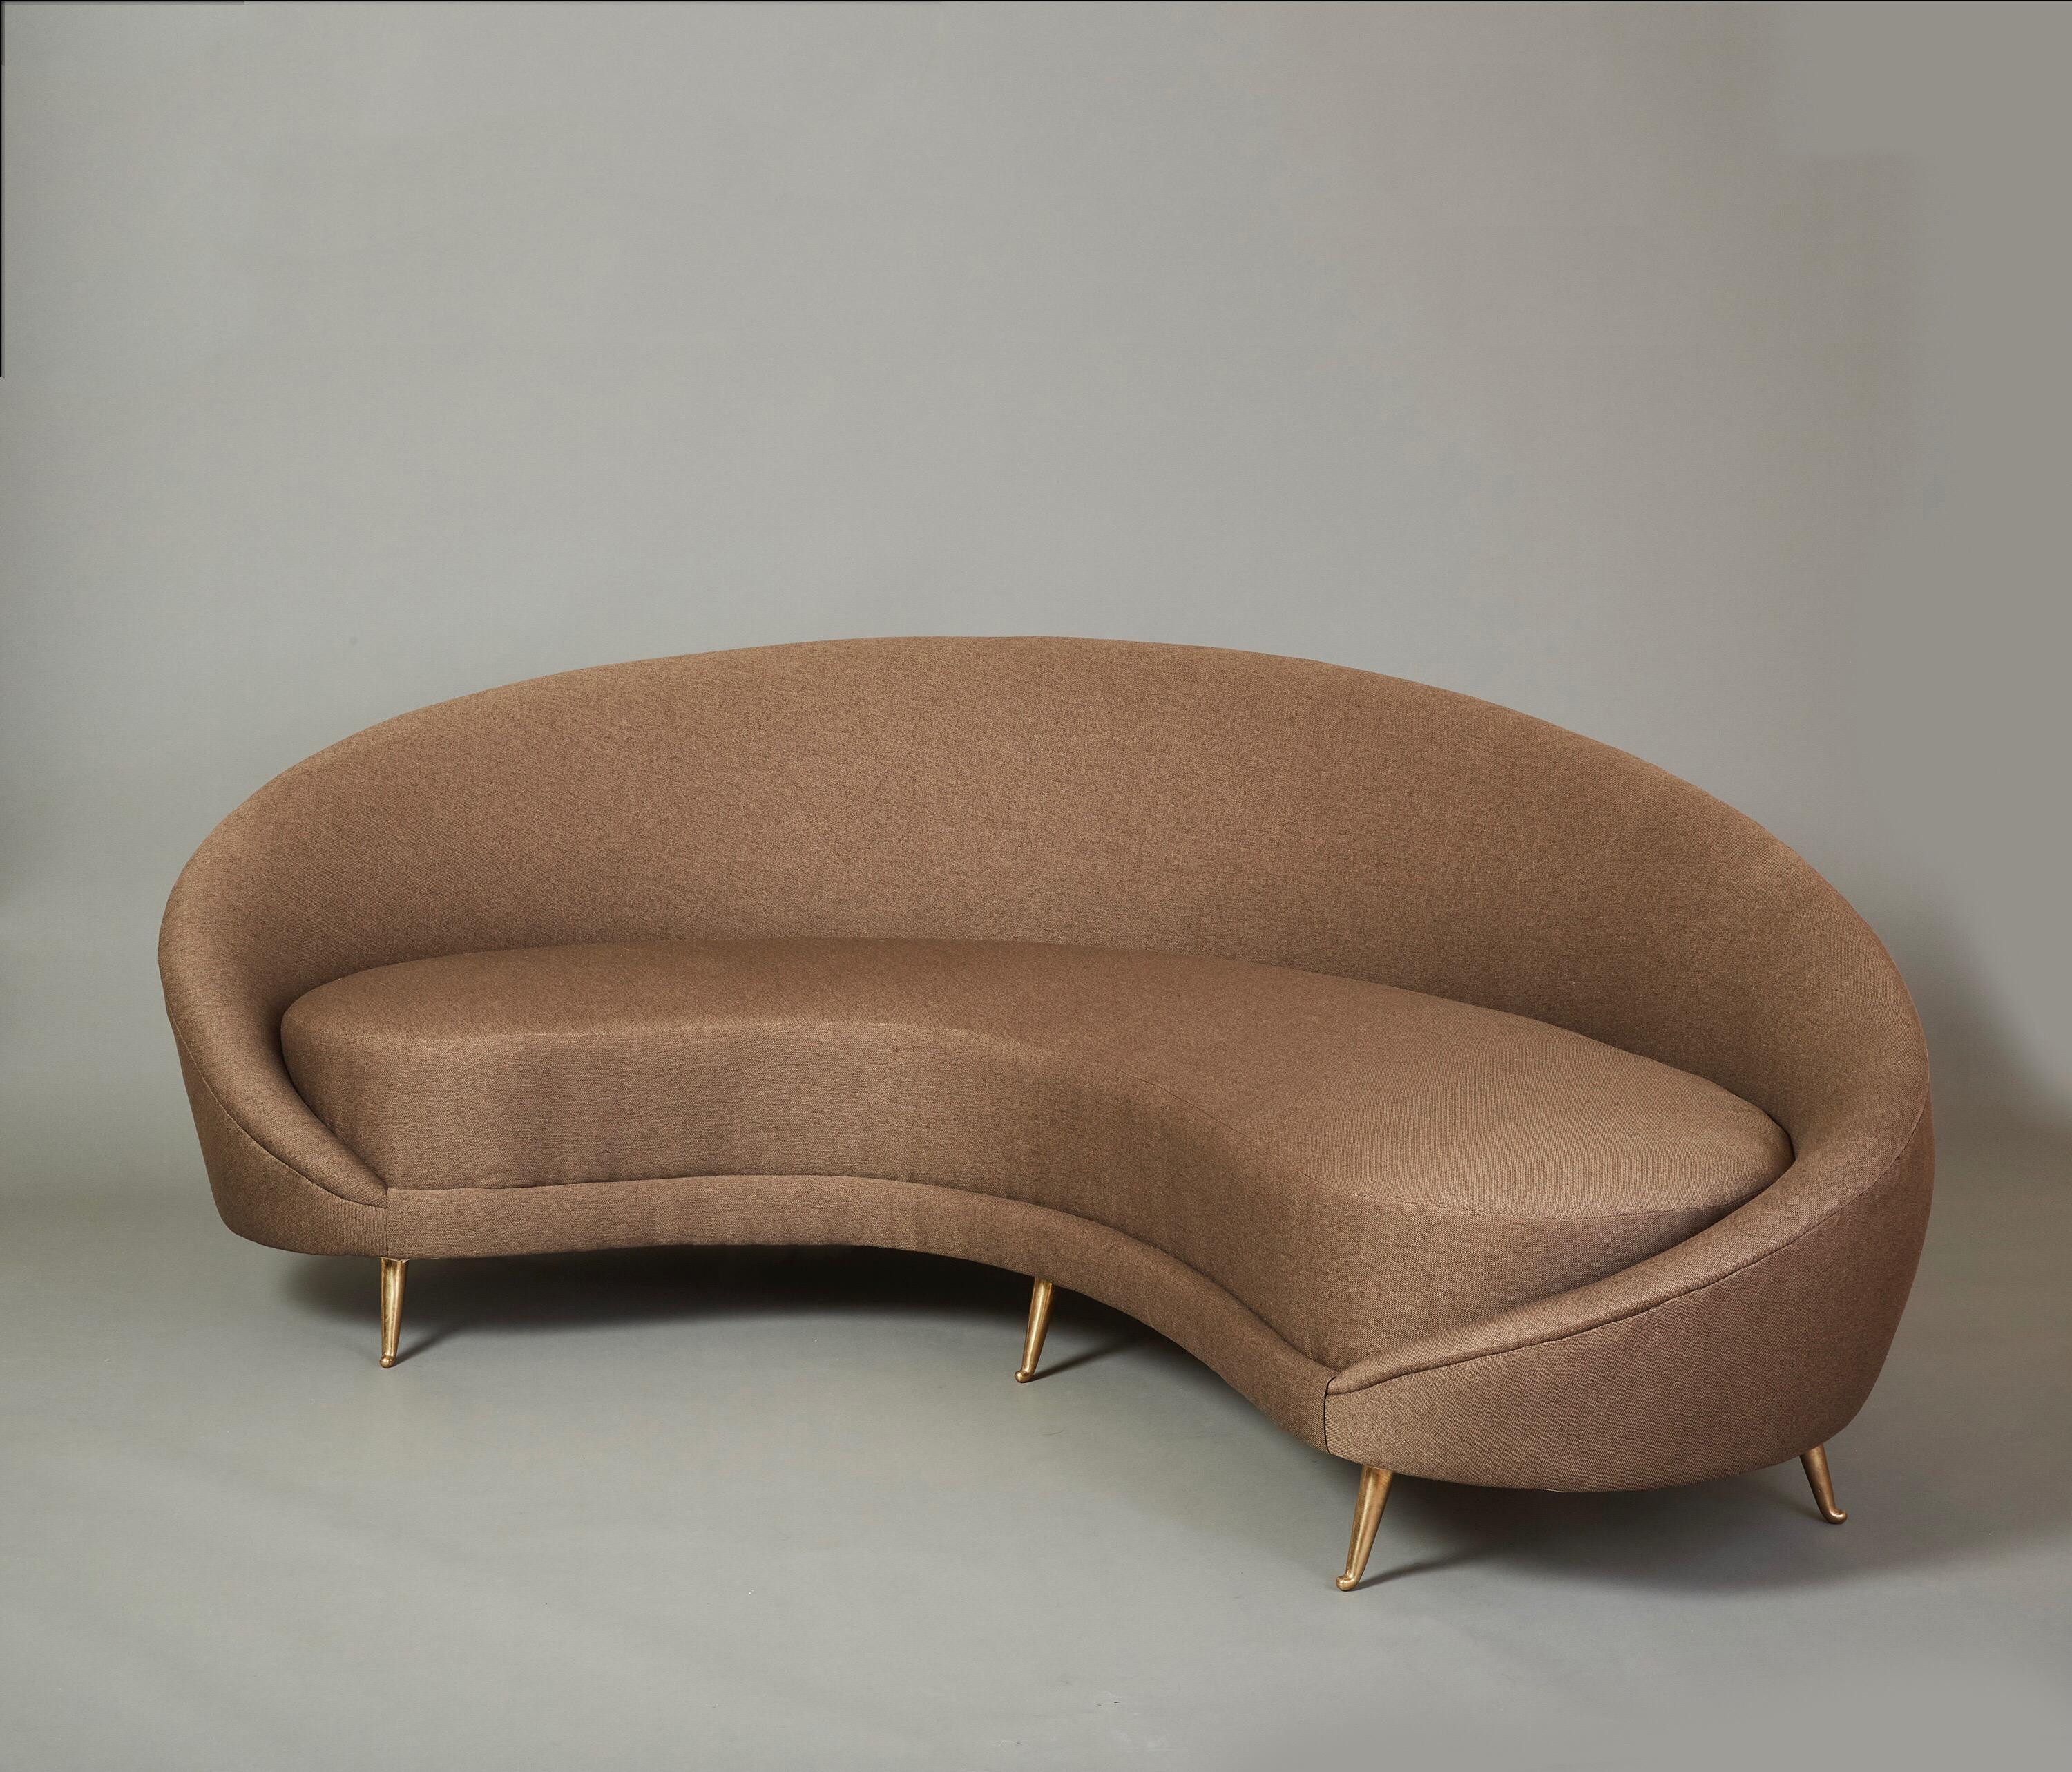 Italian Federico Munari Curved Boomerang Sofa with Polished Brass Legs, Italy 1950's For Sale